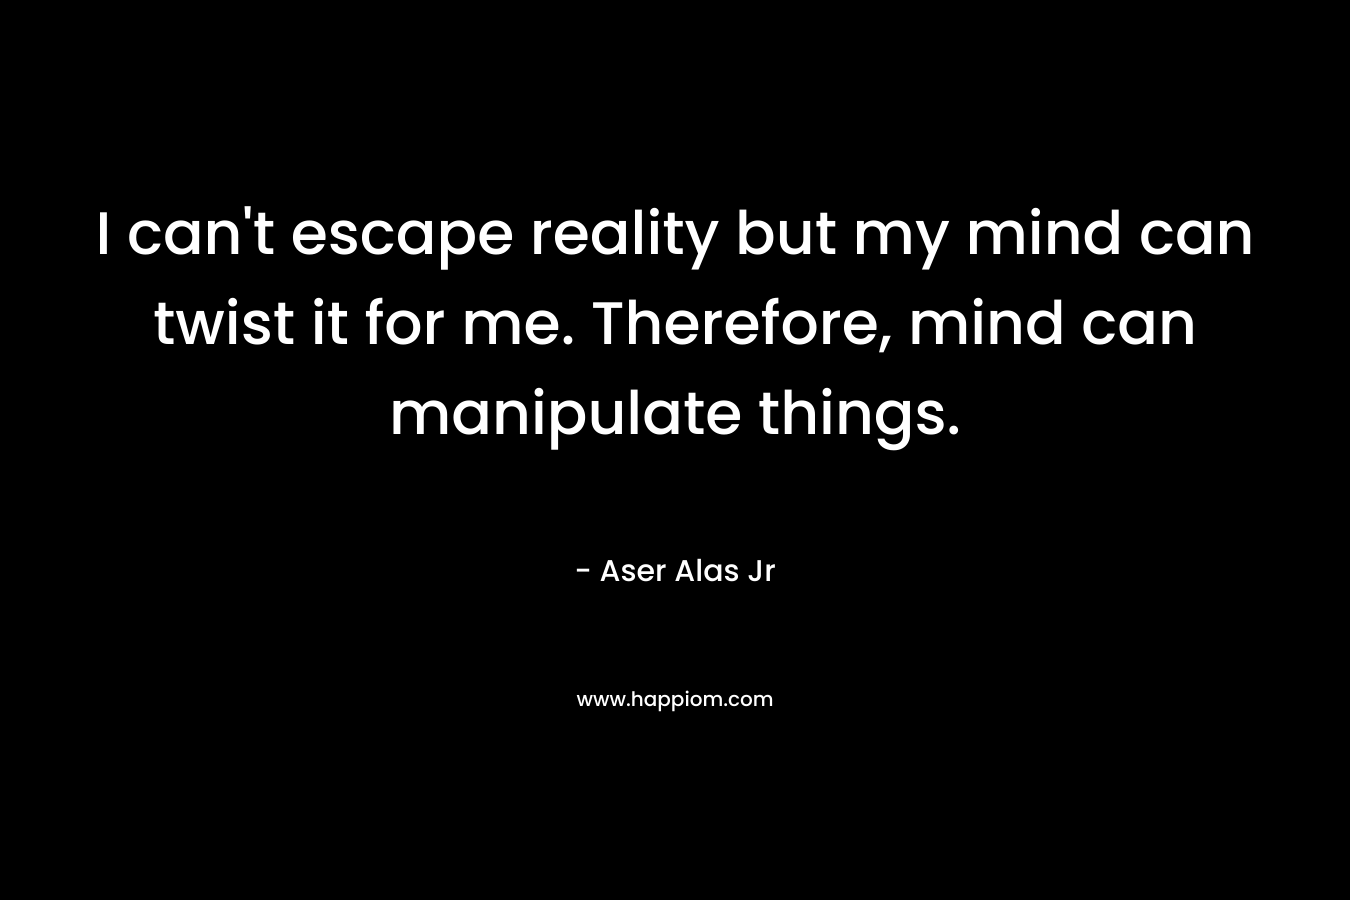 I can’t escape reality but my mind can twist it for me. Therefore, mind can manipulate things. – Aser Alas Jr